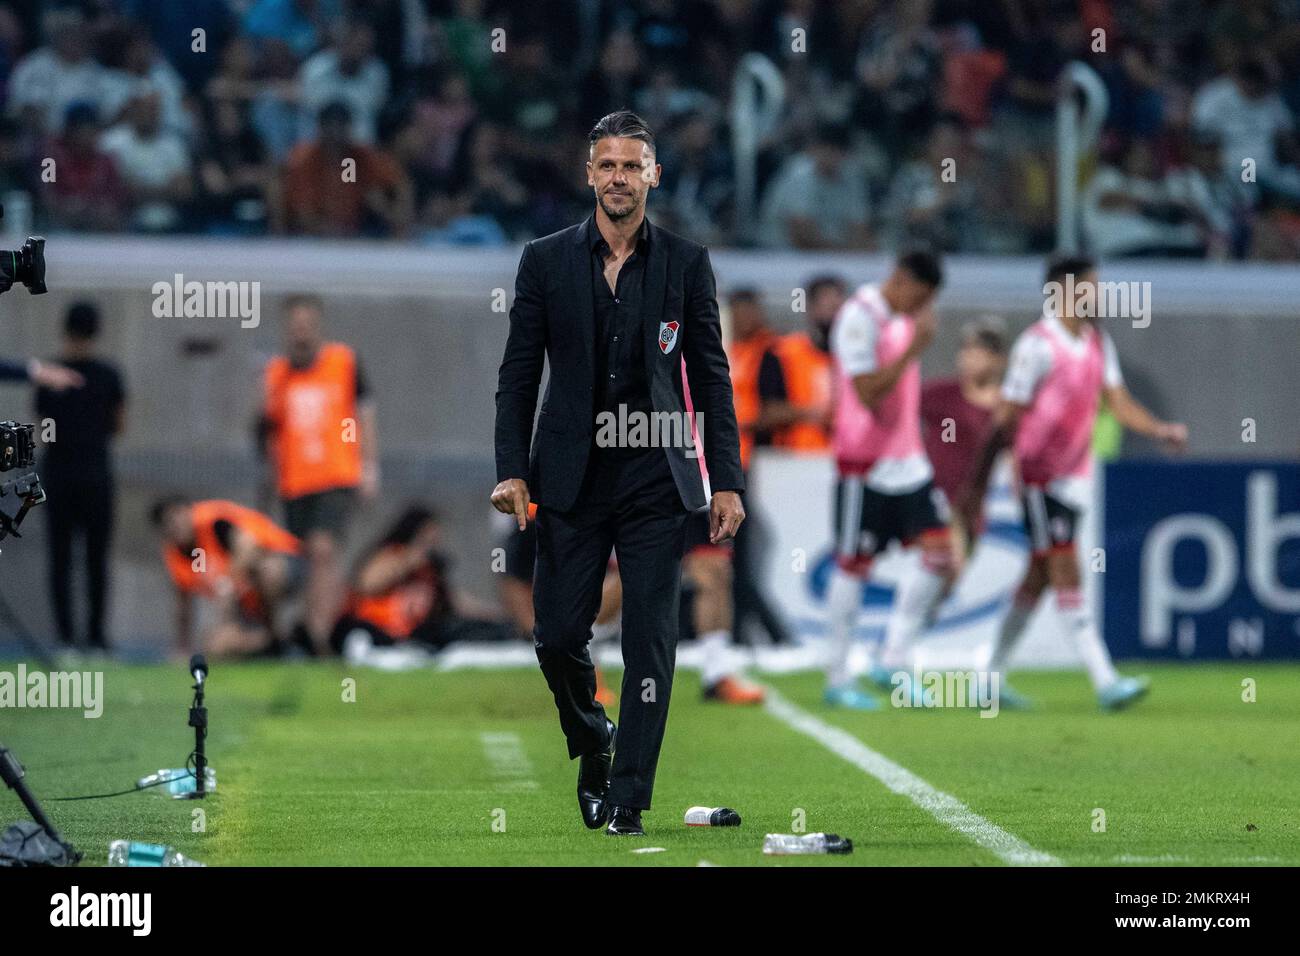 ARGENTINA, 28 January 2023: Manager Martin Demichelis of River Plate, former Bayern Munich coach and player during the Torneo Binance 2023 of Argentine Liga Profesional match between Central Cordoba and River Plate at Stadium Único Madre de Ciudades in Santiago del Estero, Argentina on 28 January 2023. Photo by SFSI Credit: Sebo47/Alamy Live News Stock Photo